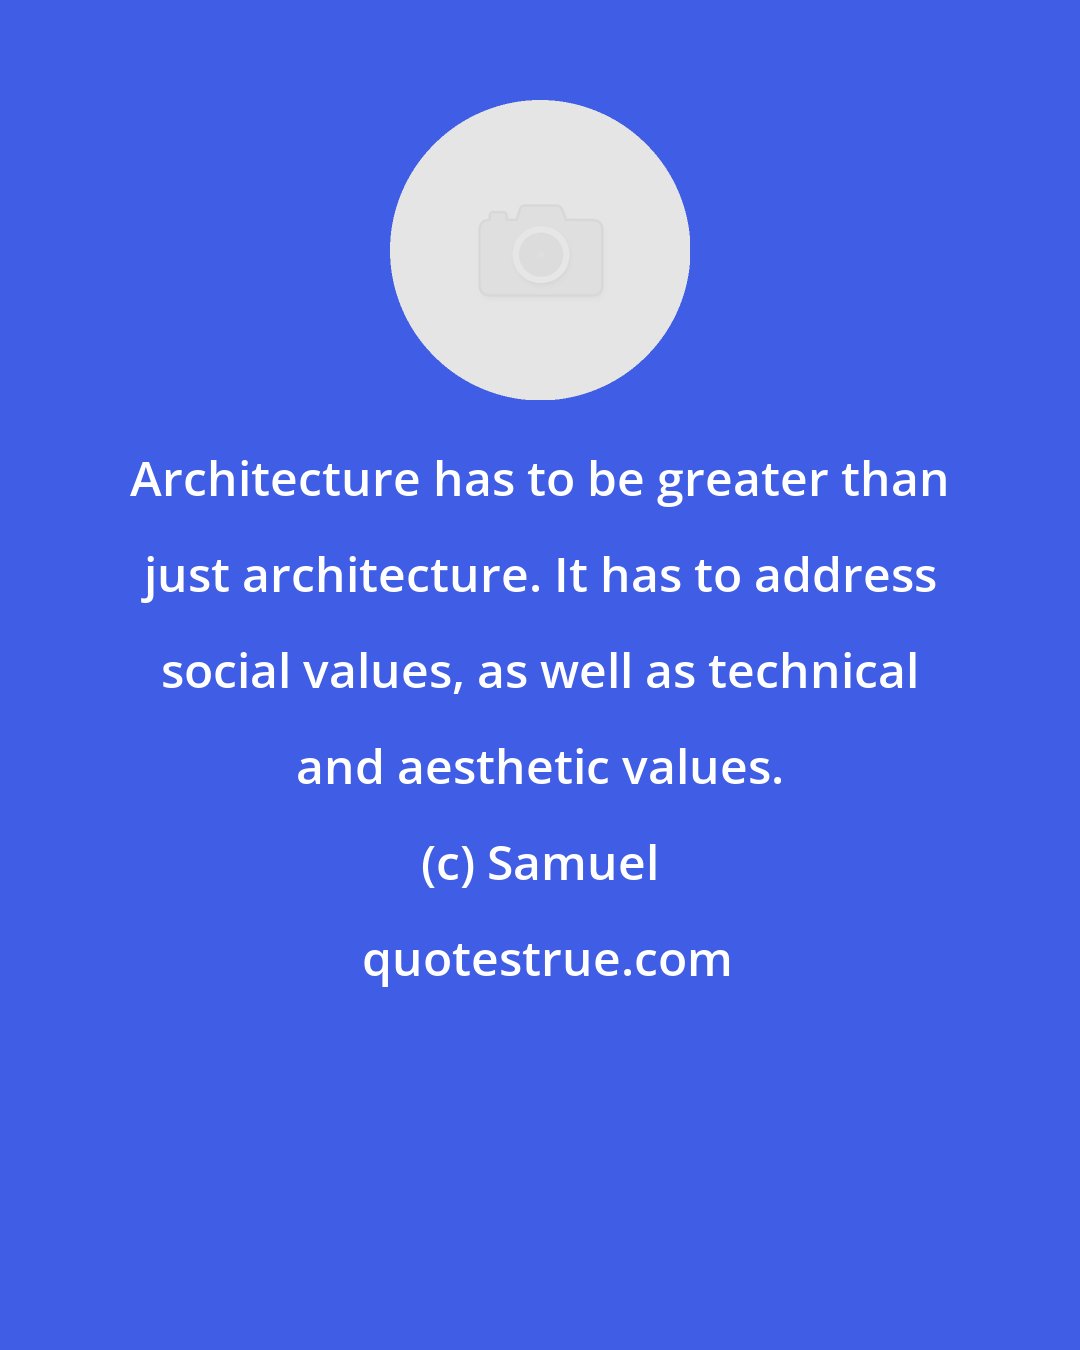 Samuel: Architecture has to be greater than just architecture. It has to address social values, as well as technical and aesthetic values.